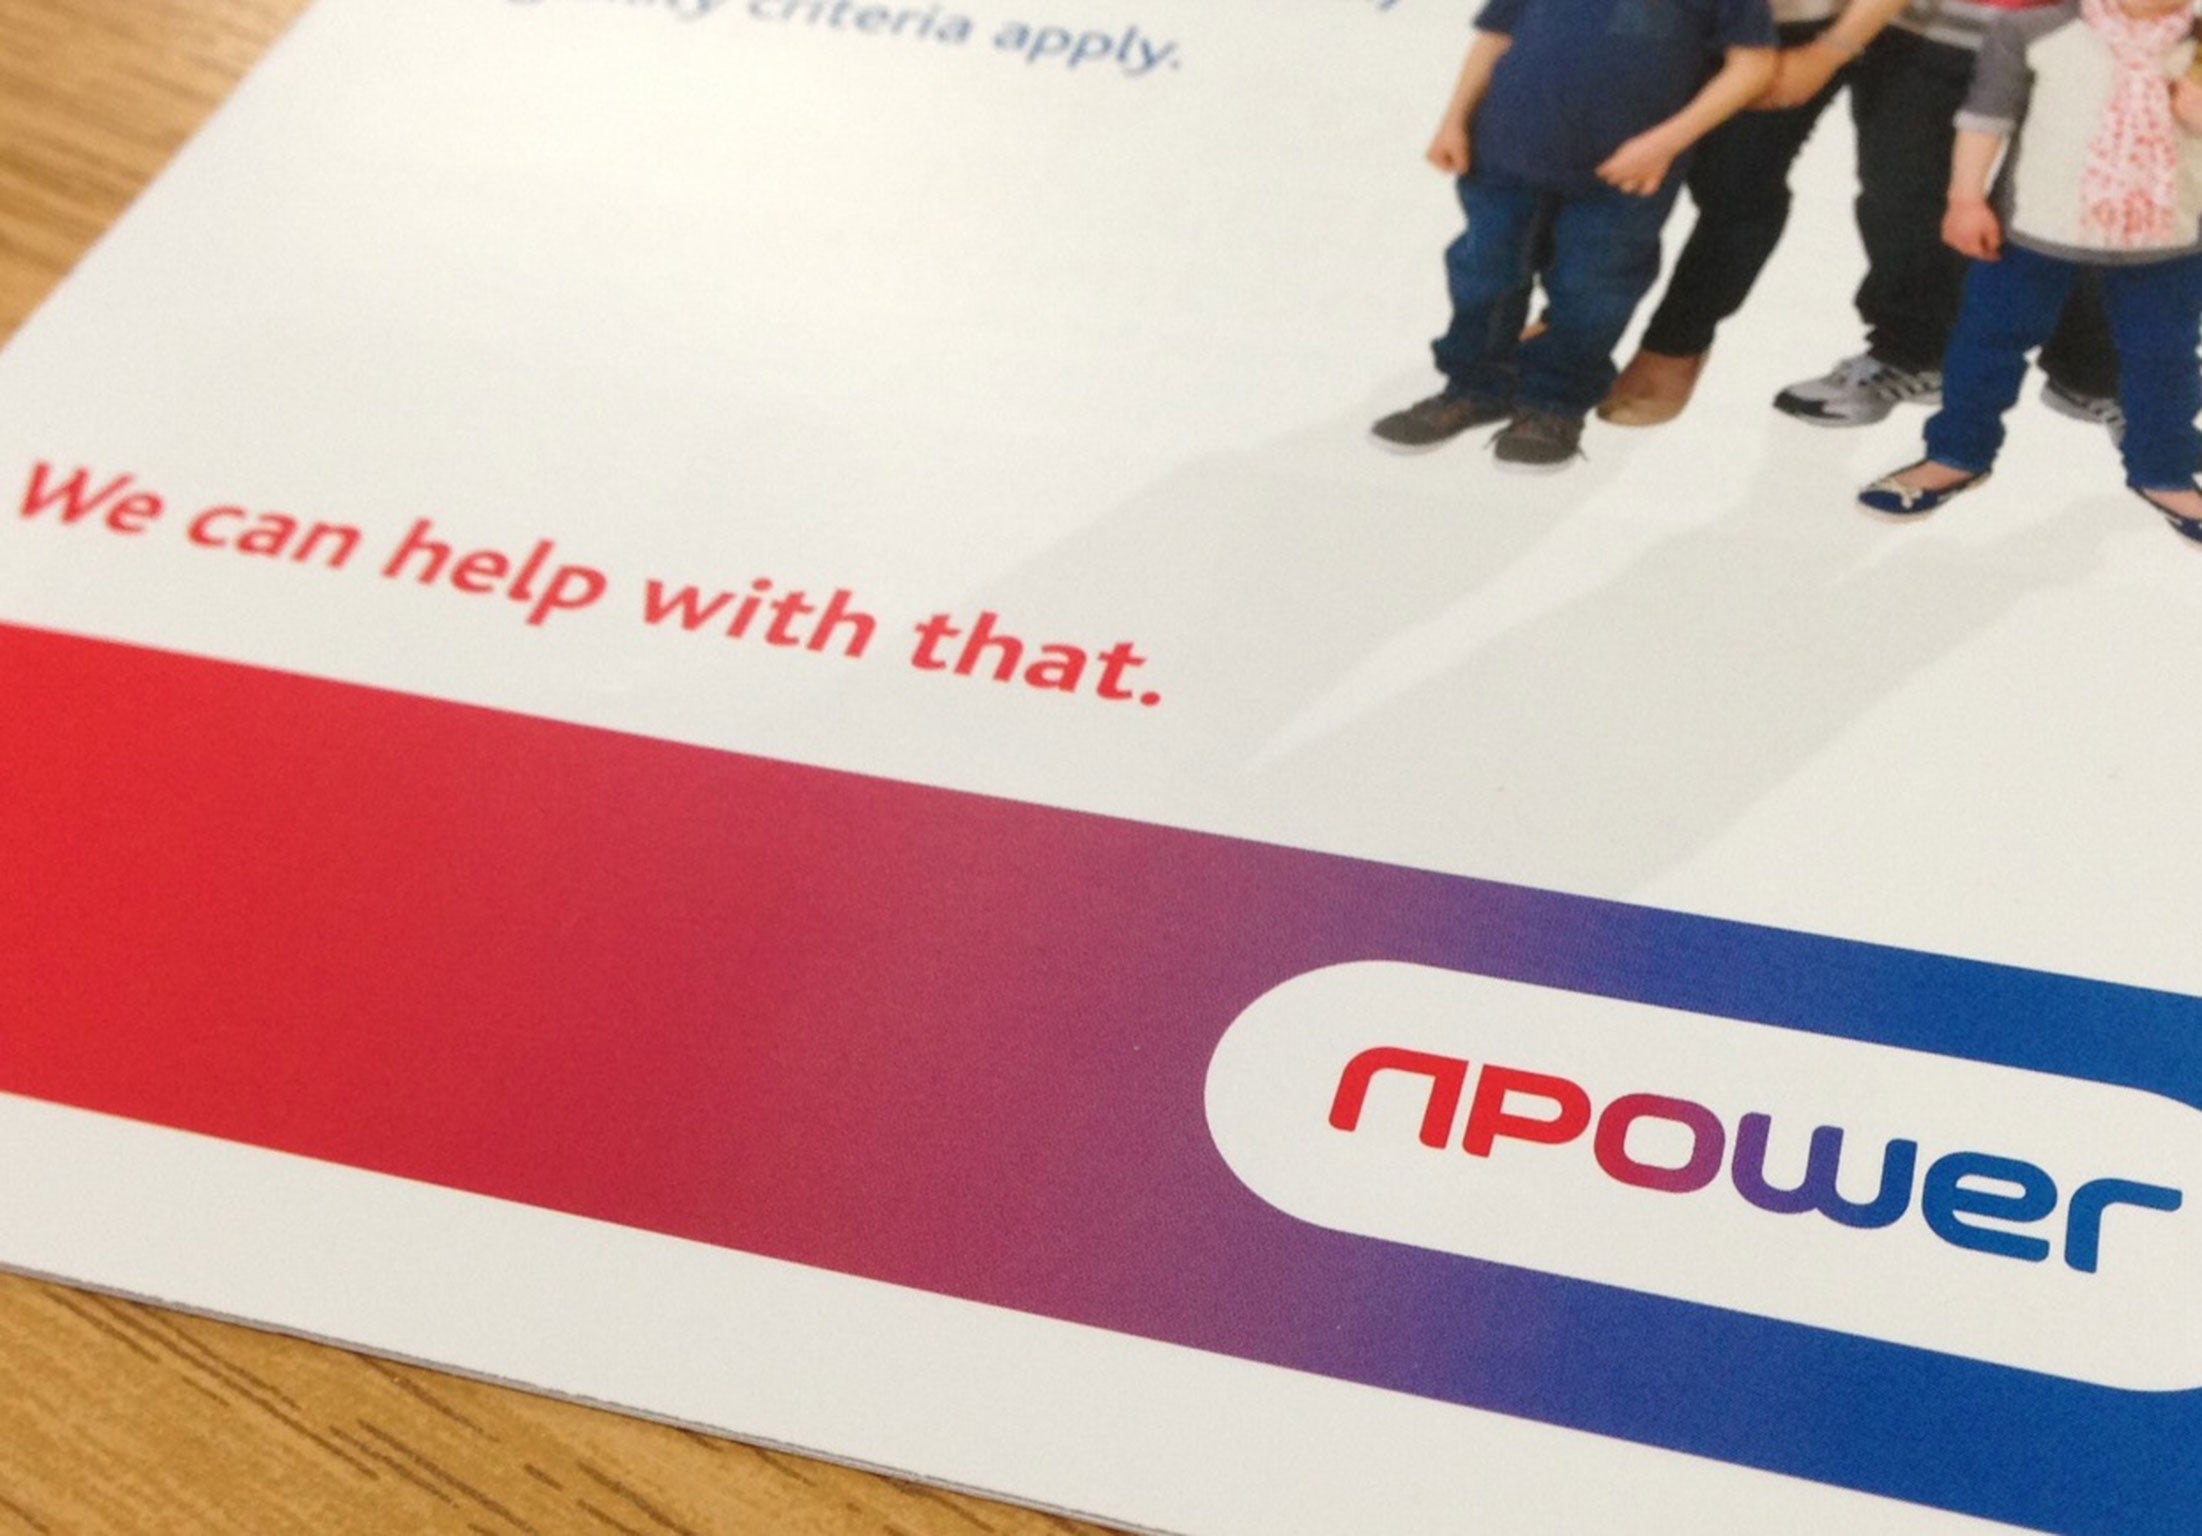 Energy supplier Npower is expected to announce 2,500 job cuts on Tuesday